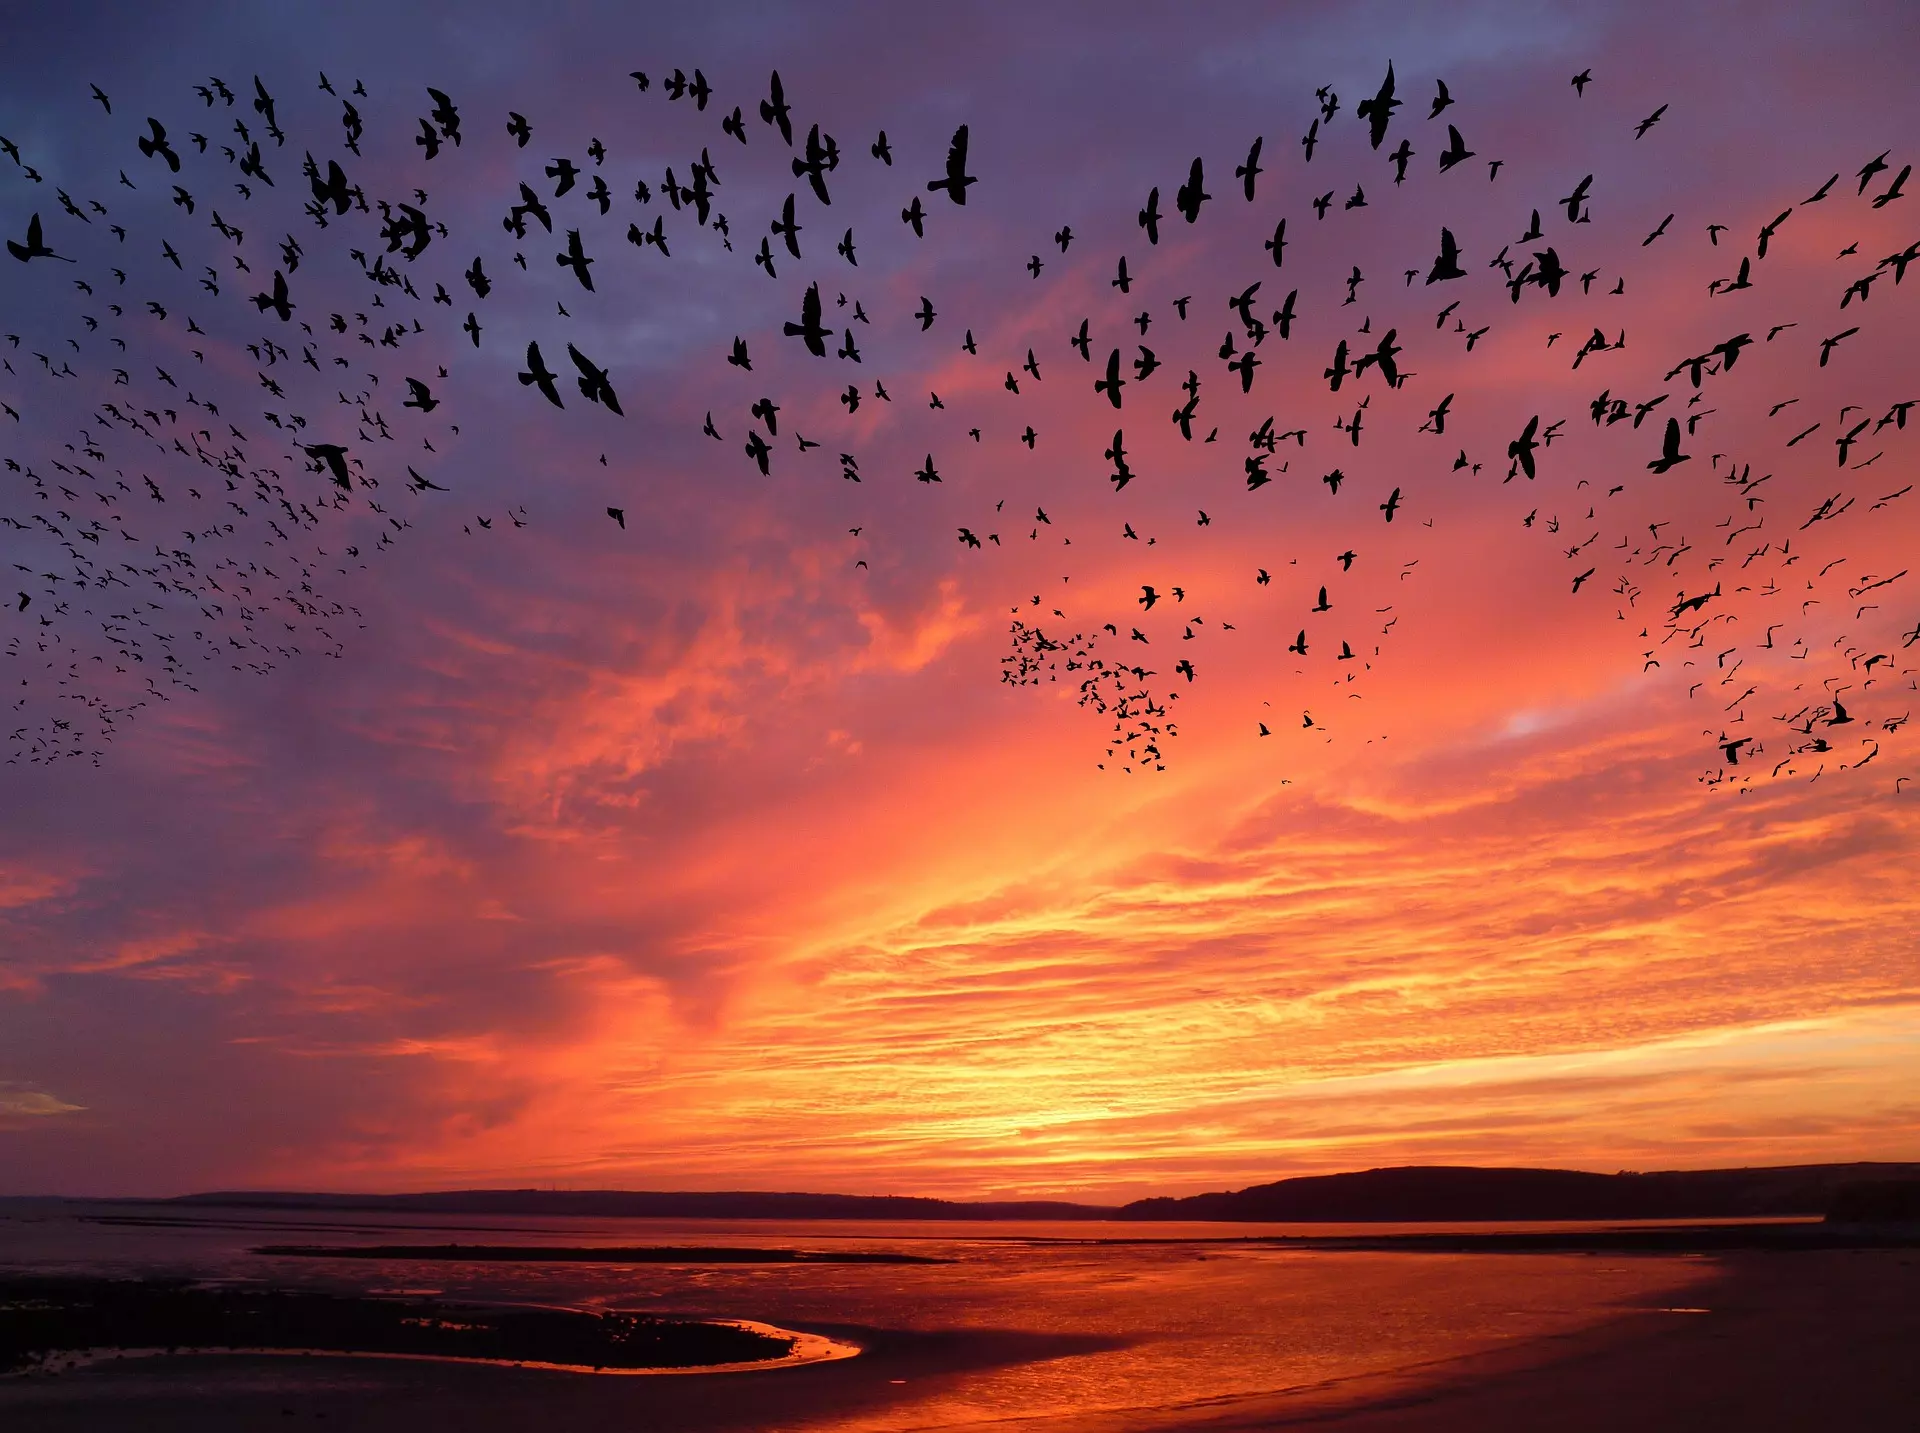 A flock of birds silhouetted by the setting sun